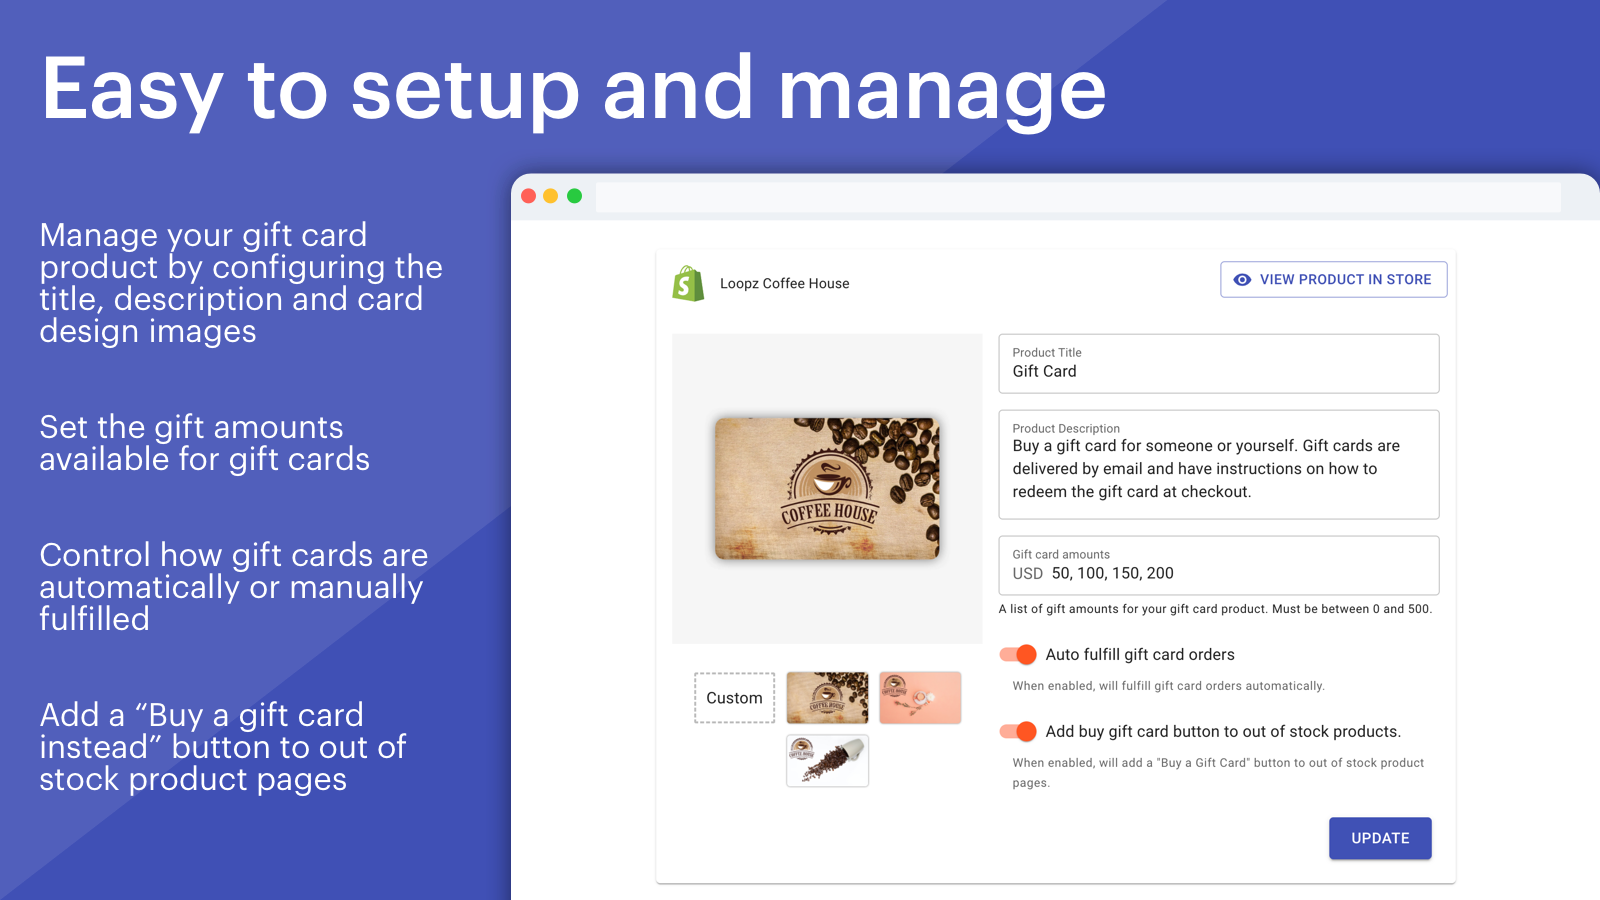 Easy to setup and manage your gift card product